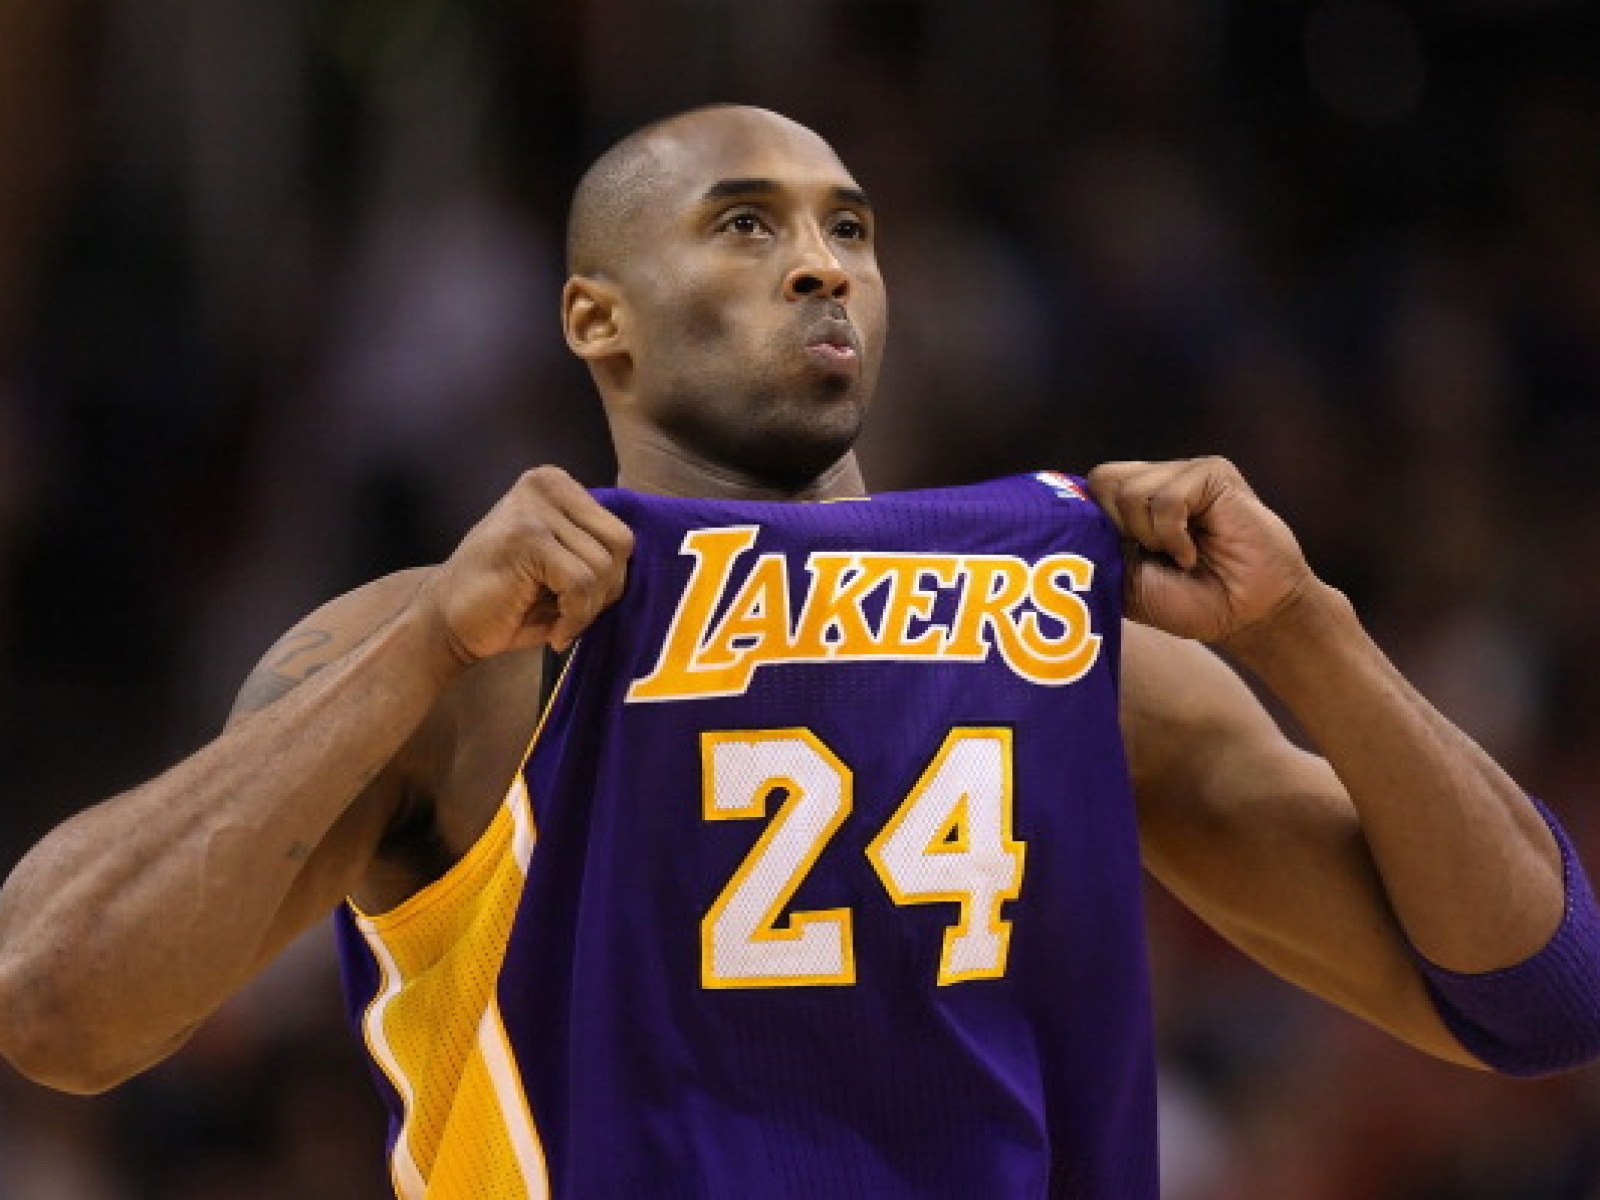 Kobe Bryant's best quotes: Inspirational words from the NBA legend